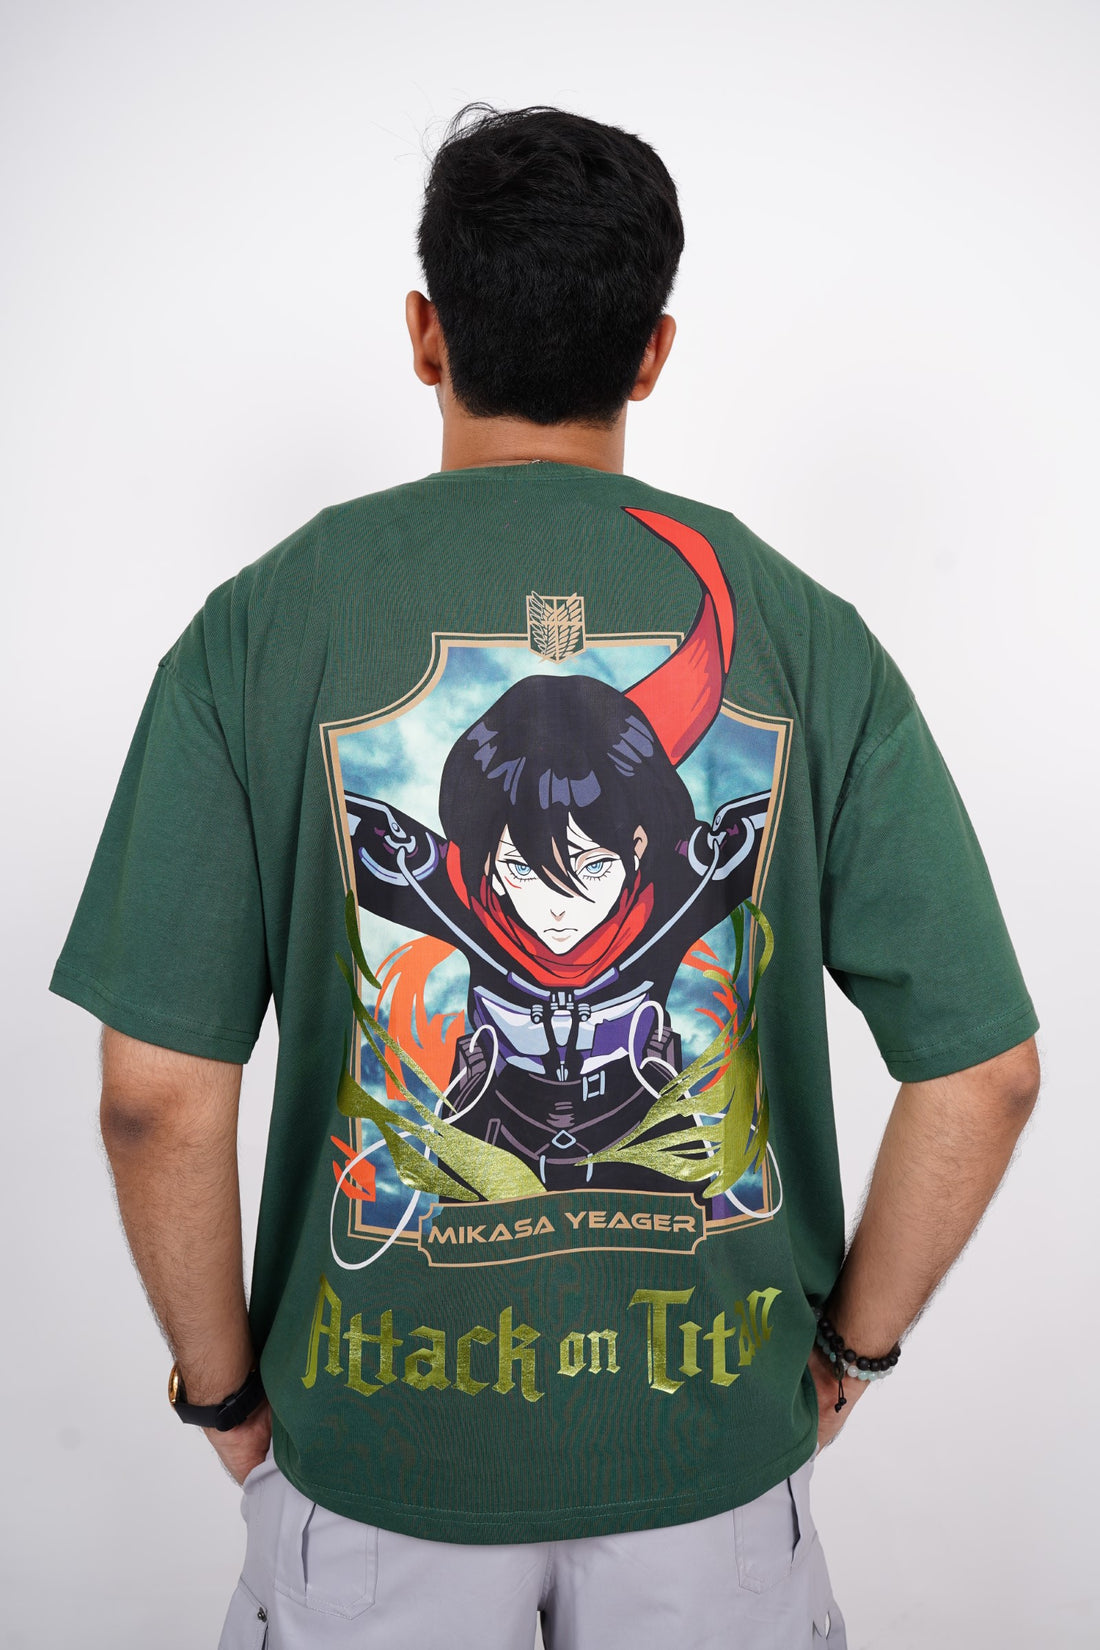 Mikasa Yeager - Attack On titan Drop-Sleeved  Tee For Men and Women